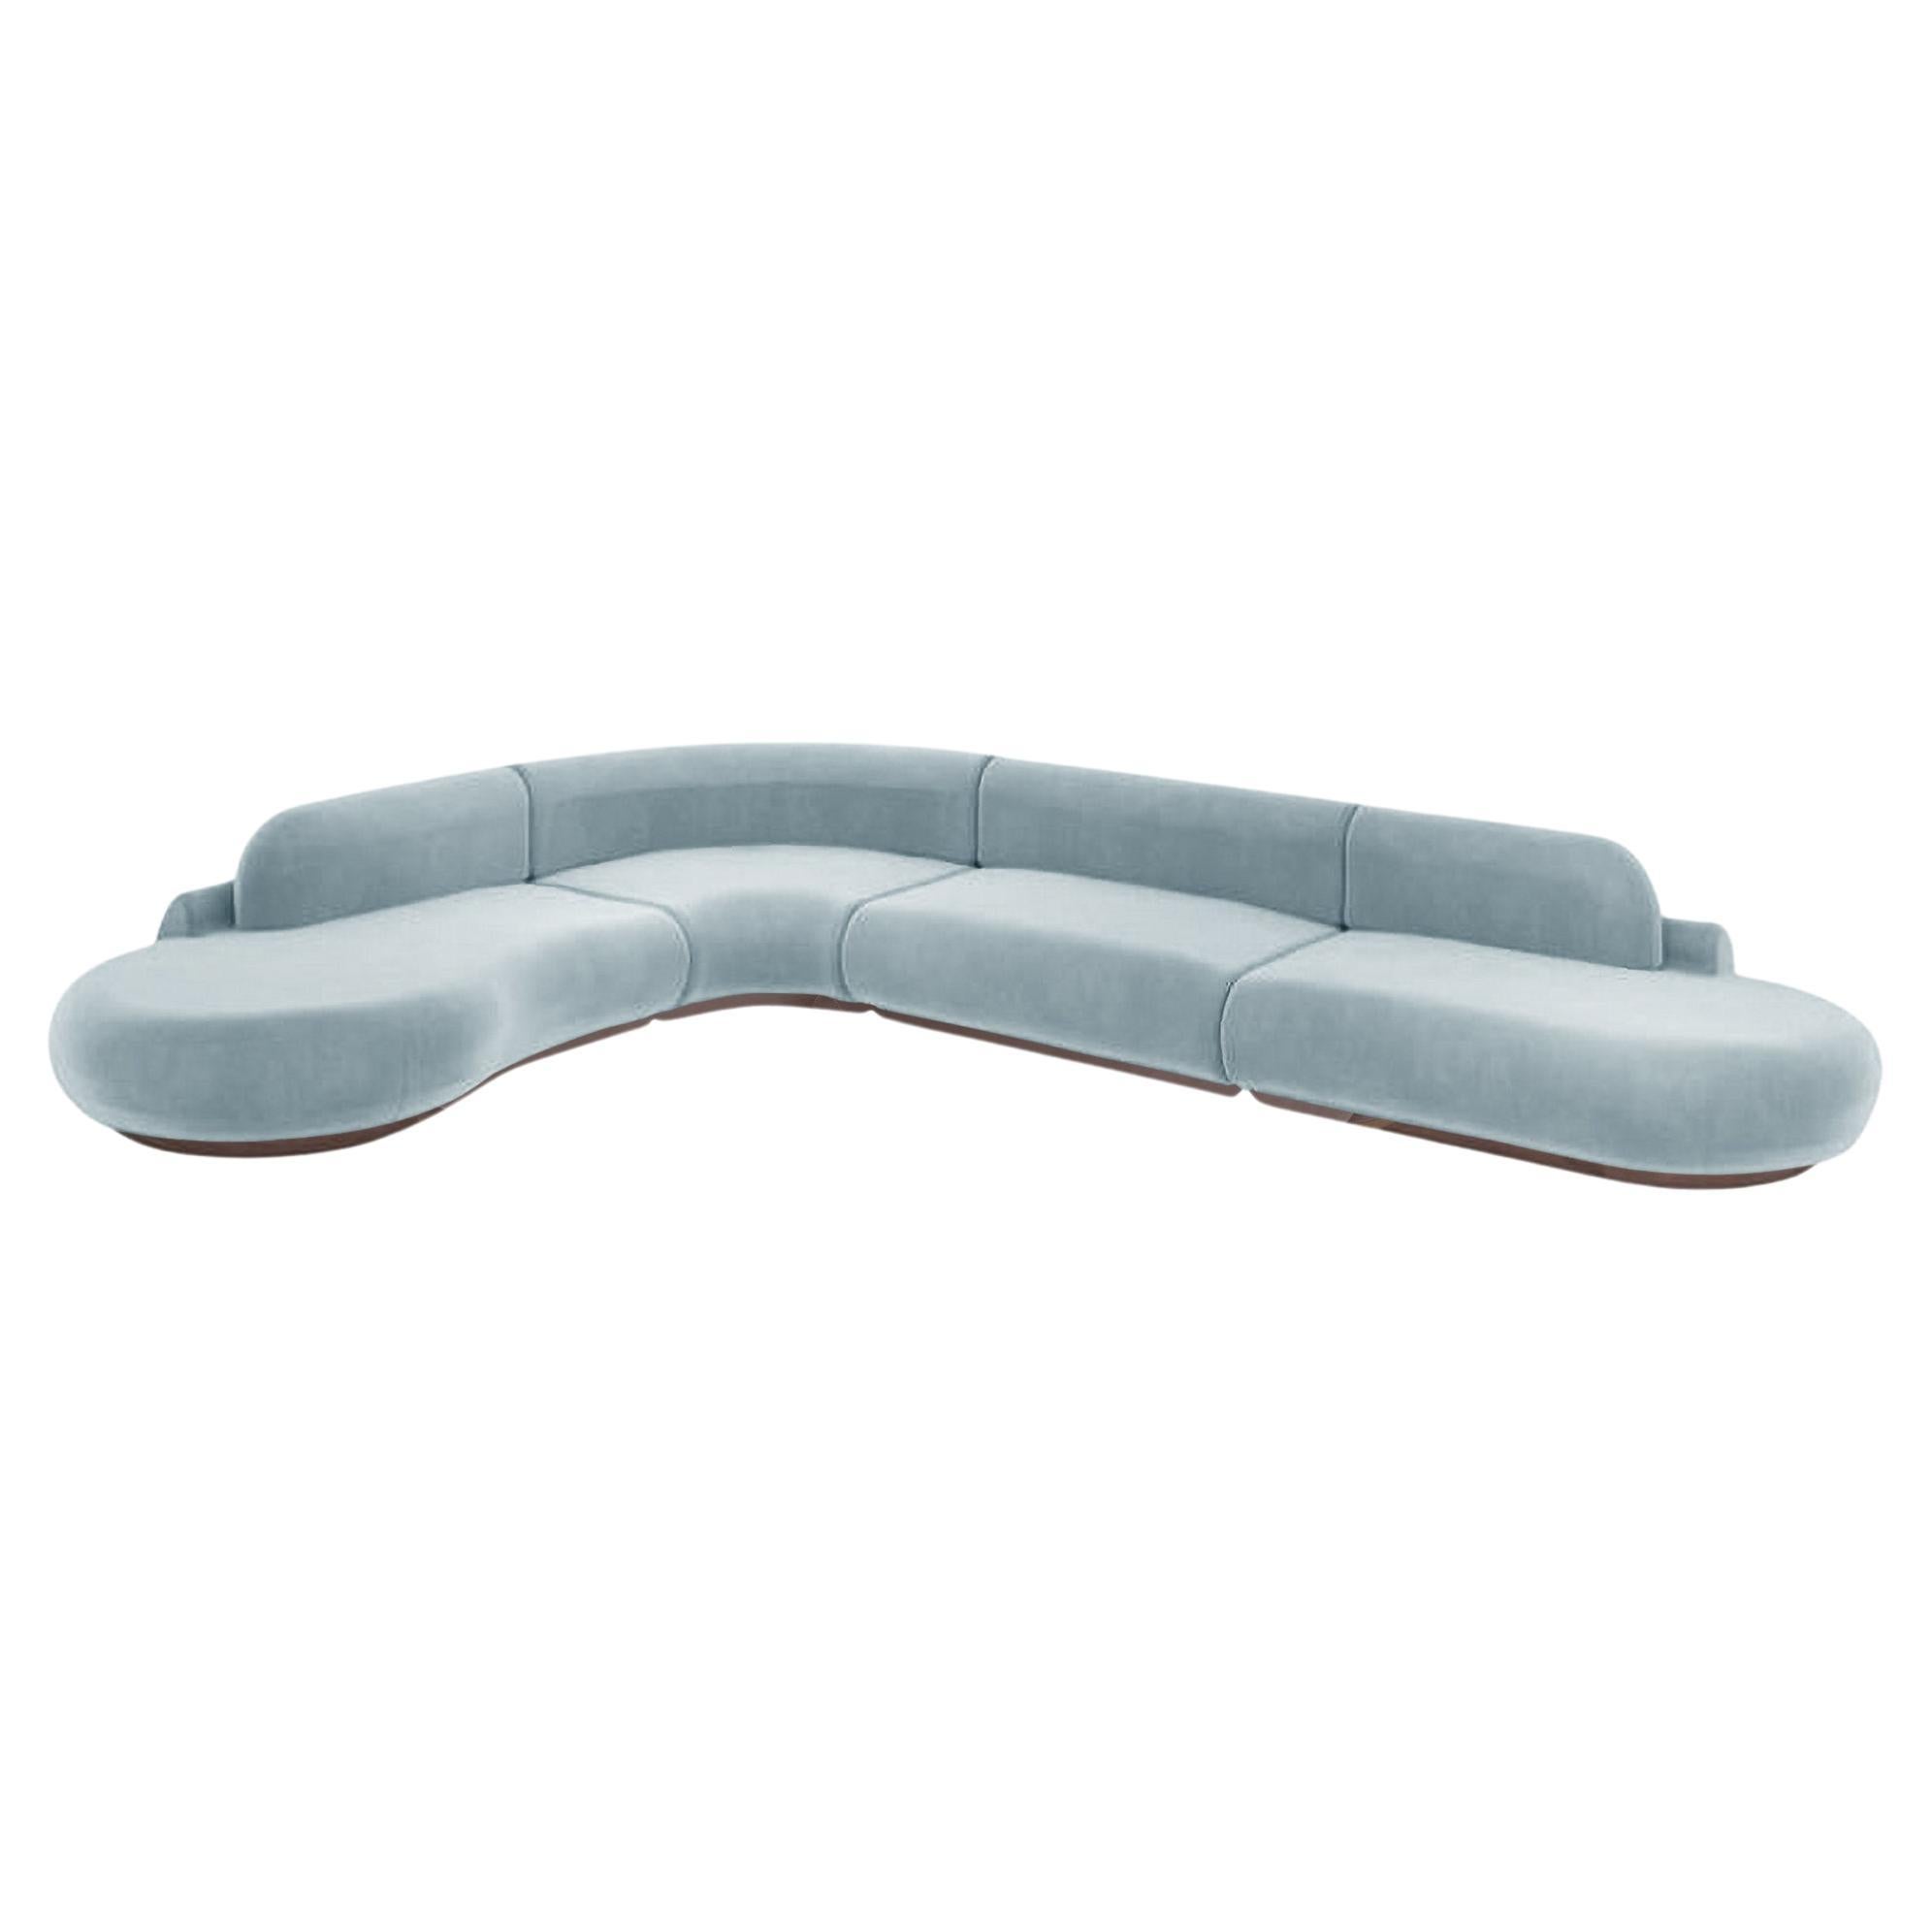 Naked Curved Sectional Sofa, 4 Piece with Beech Ash-056-1 and Paris Safira For Sale